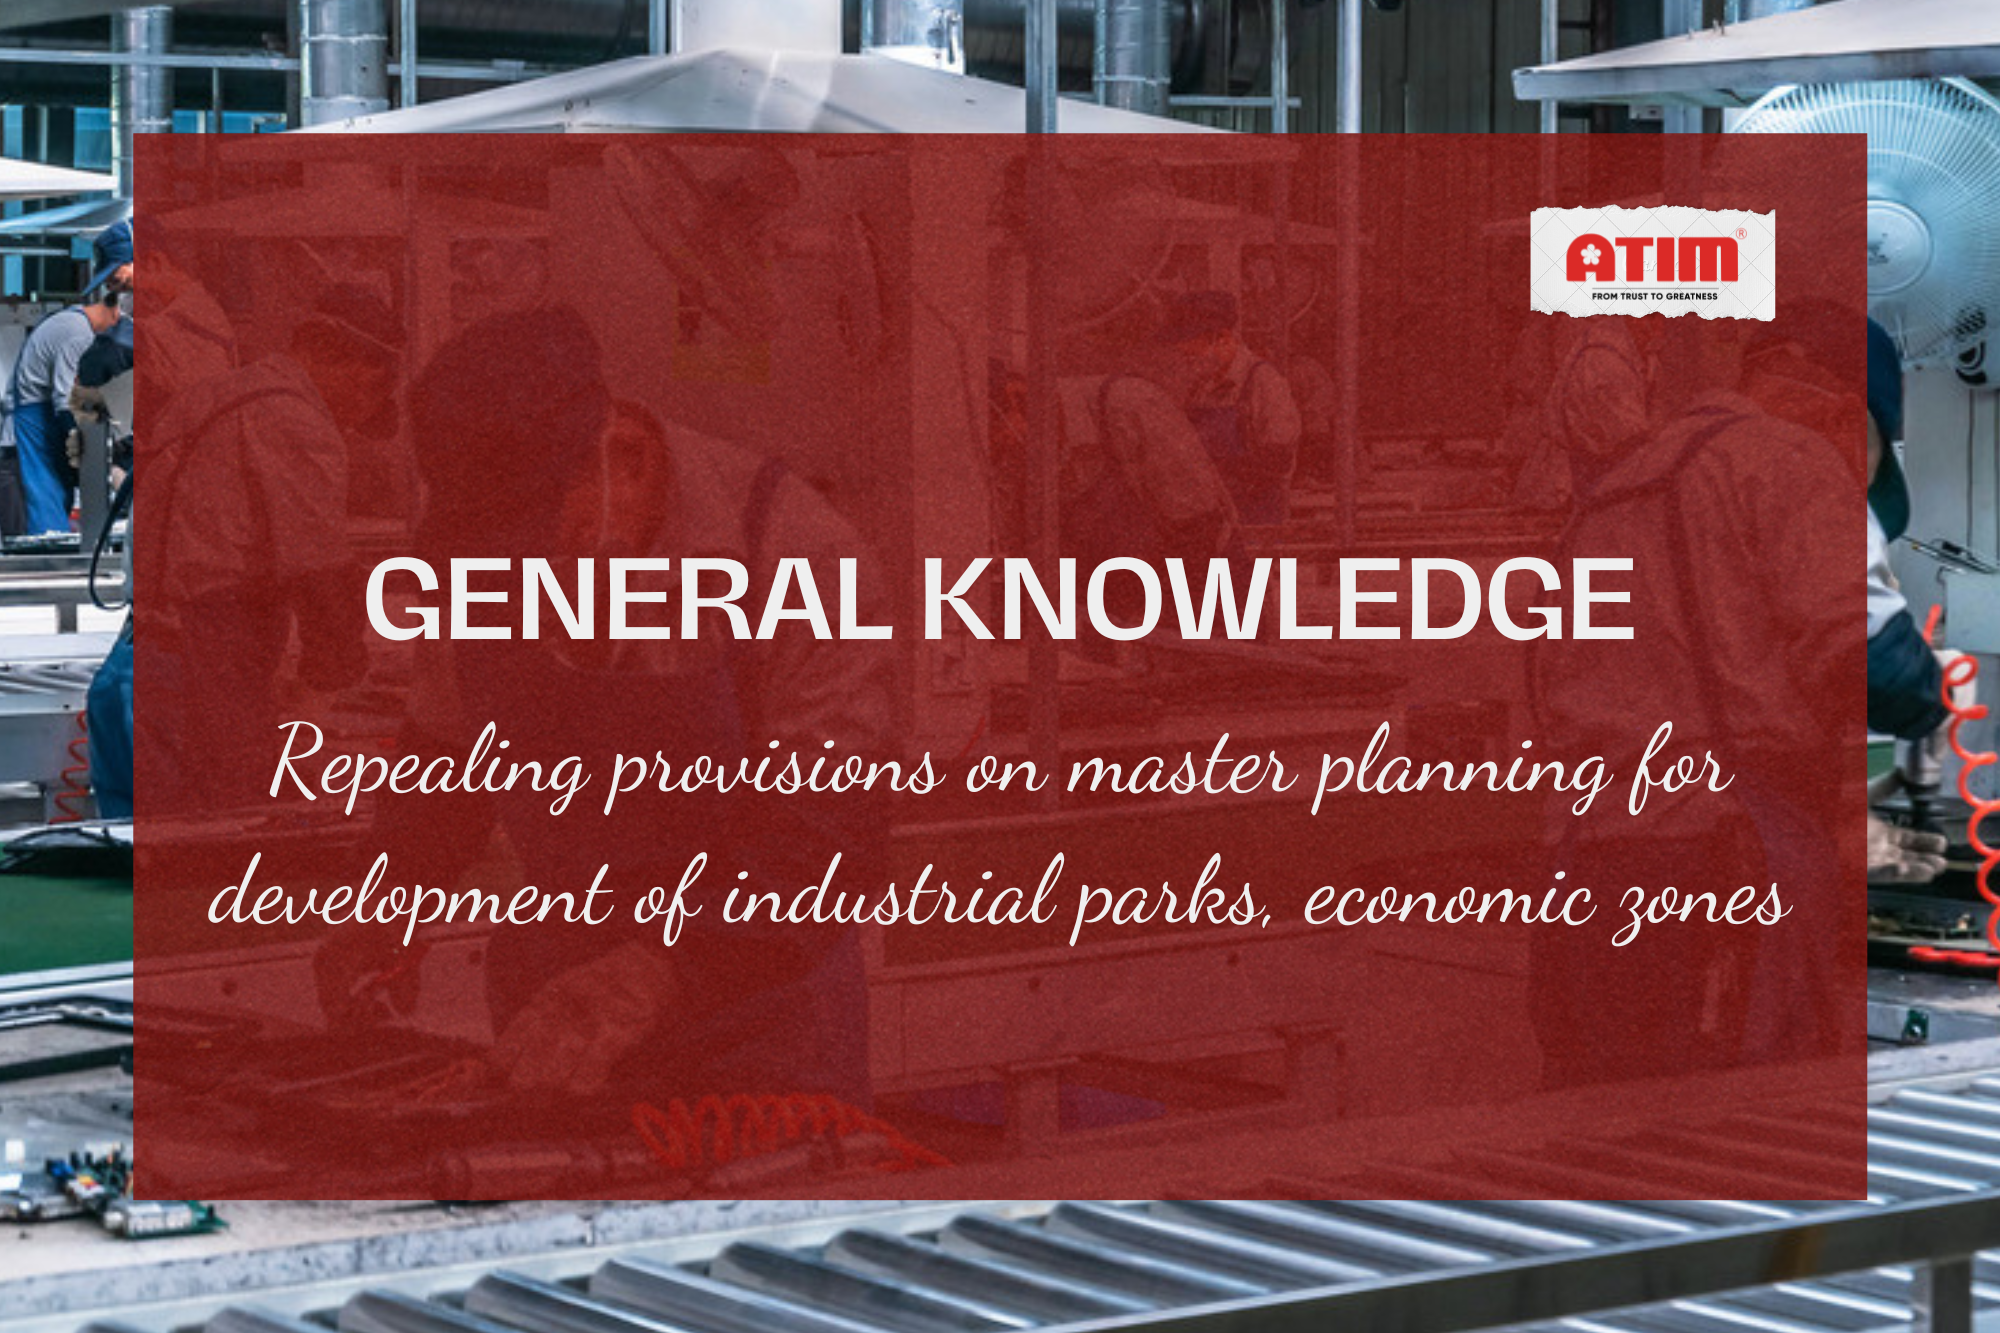 The new models of industrial parks and economic zones